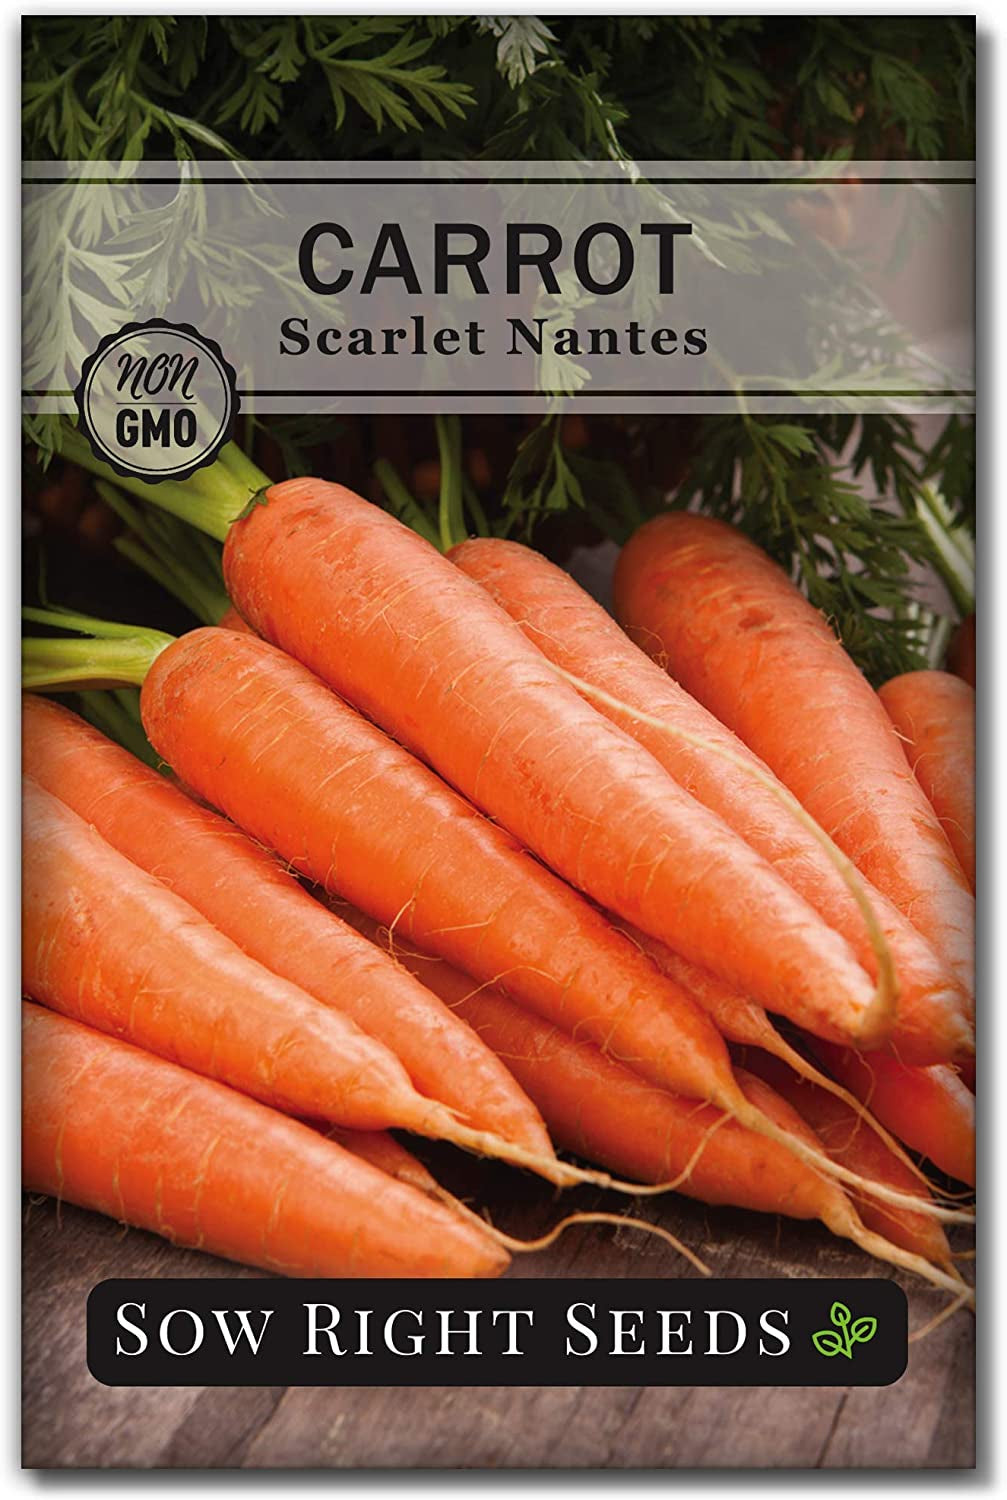 - Scarlet Nantes Carrot Seed for Planting - Non-Gmo Heirloom Packet with Instructions to Plant a Home Vegetable Garden - Indoors or Outdoor - Sweet and Vibrant Variety (1)